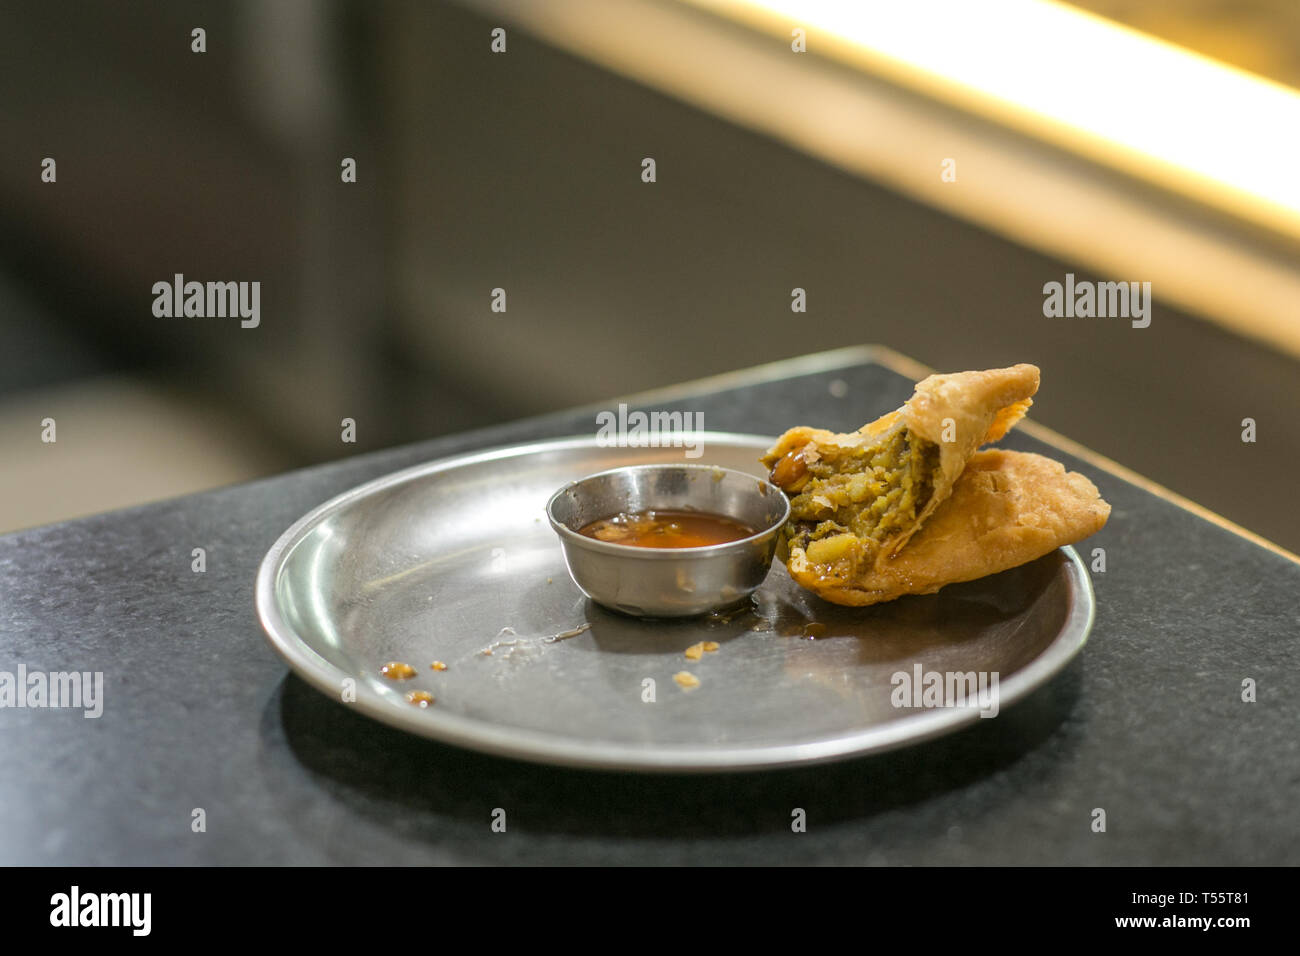 A peace of half eaten samosa on a plate in a restaurant Stock Photo